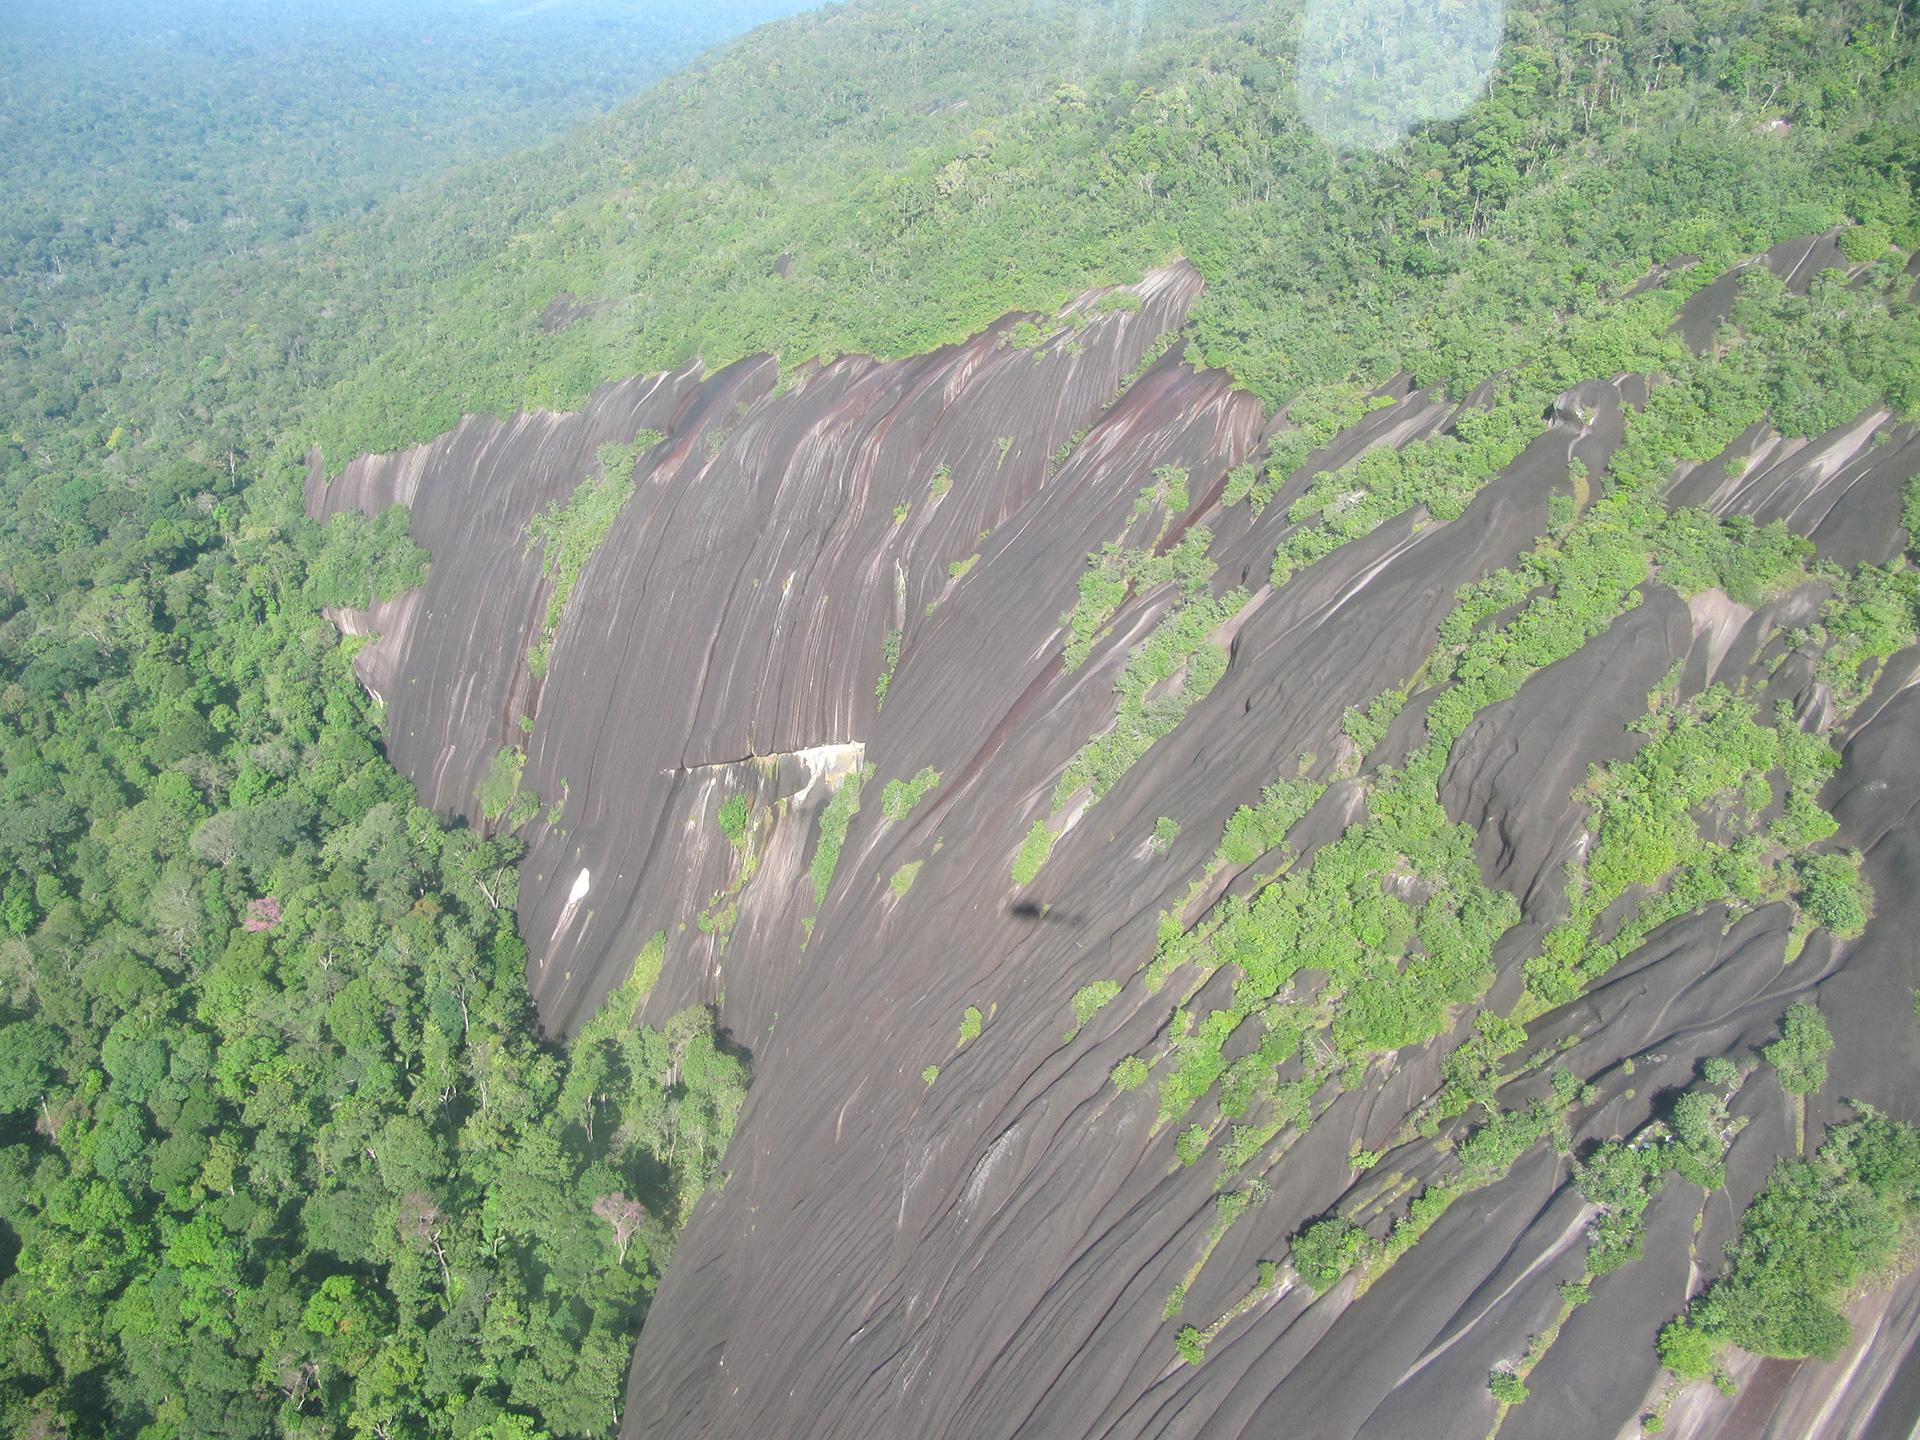 The Trinité Inselberg, French Guiana